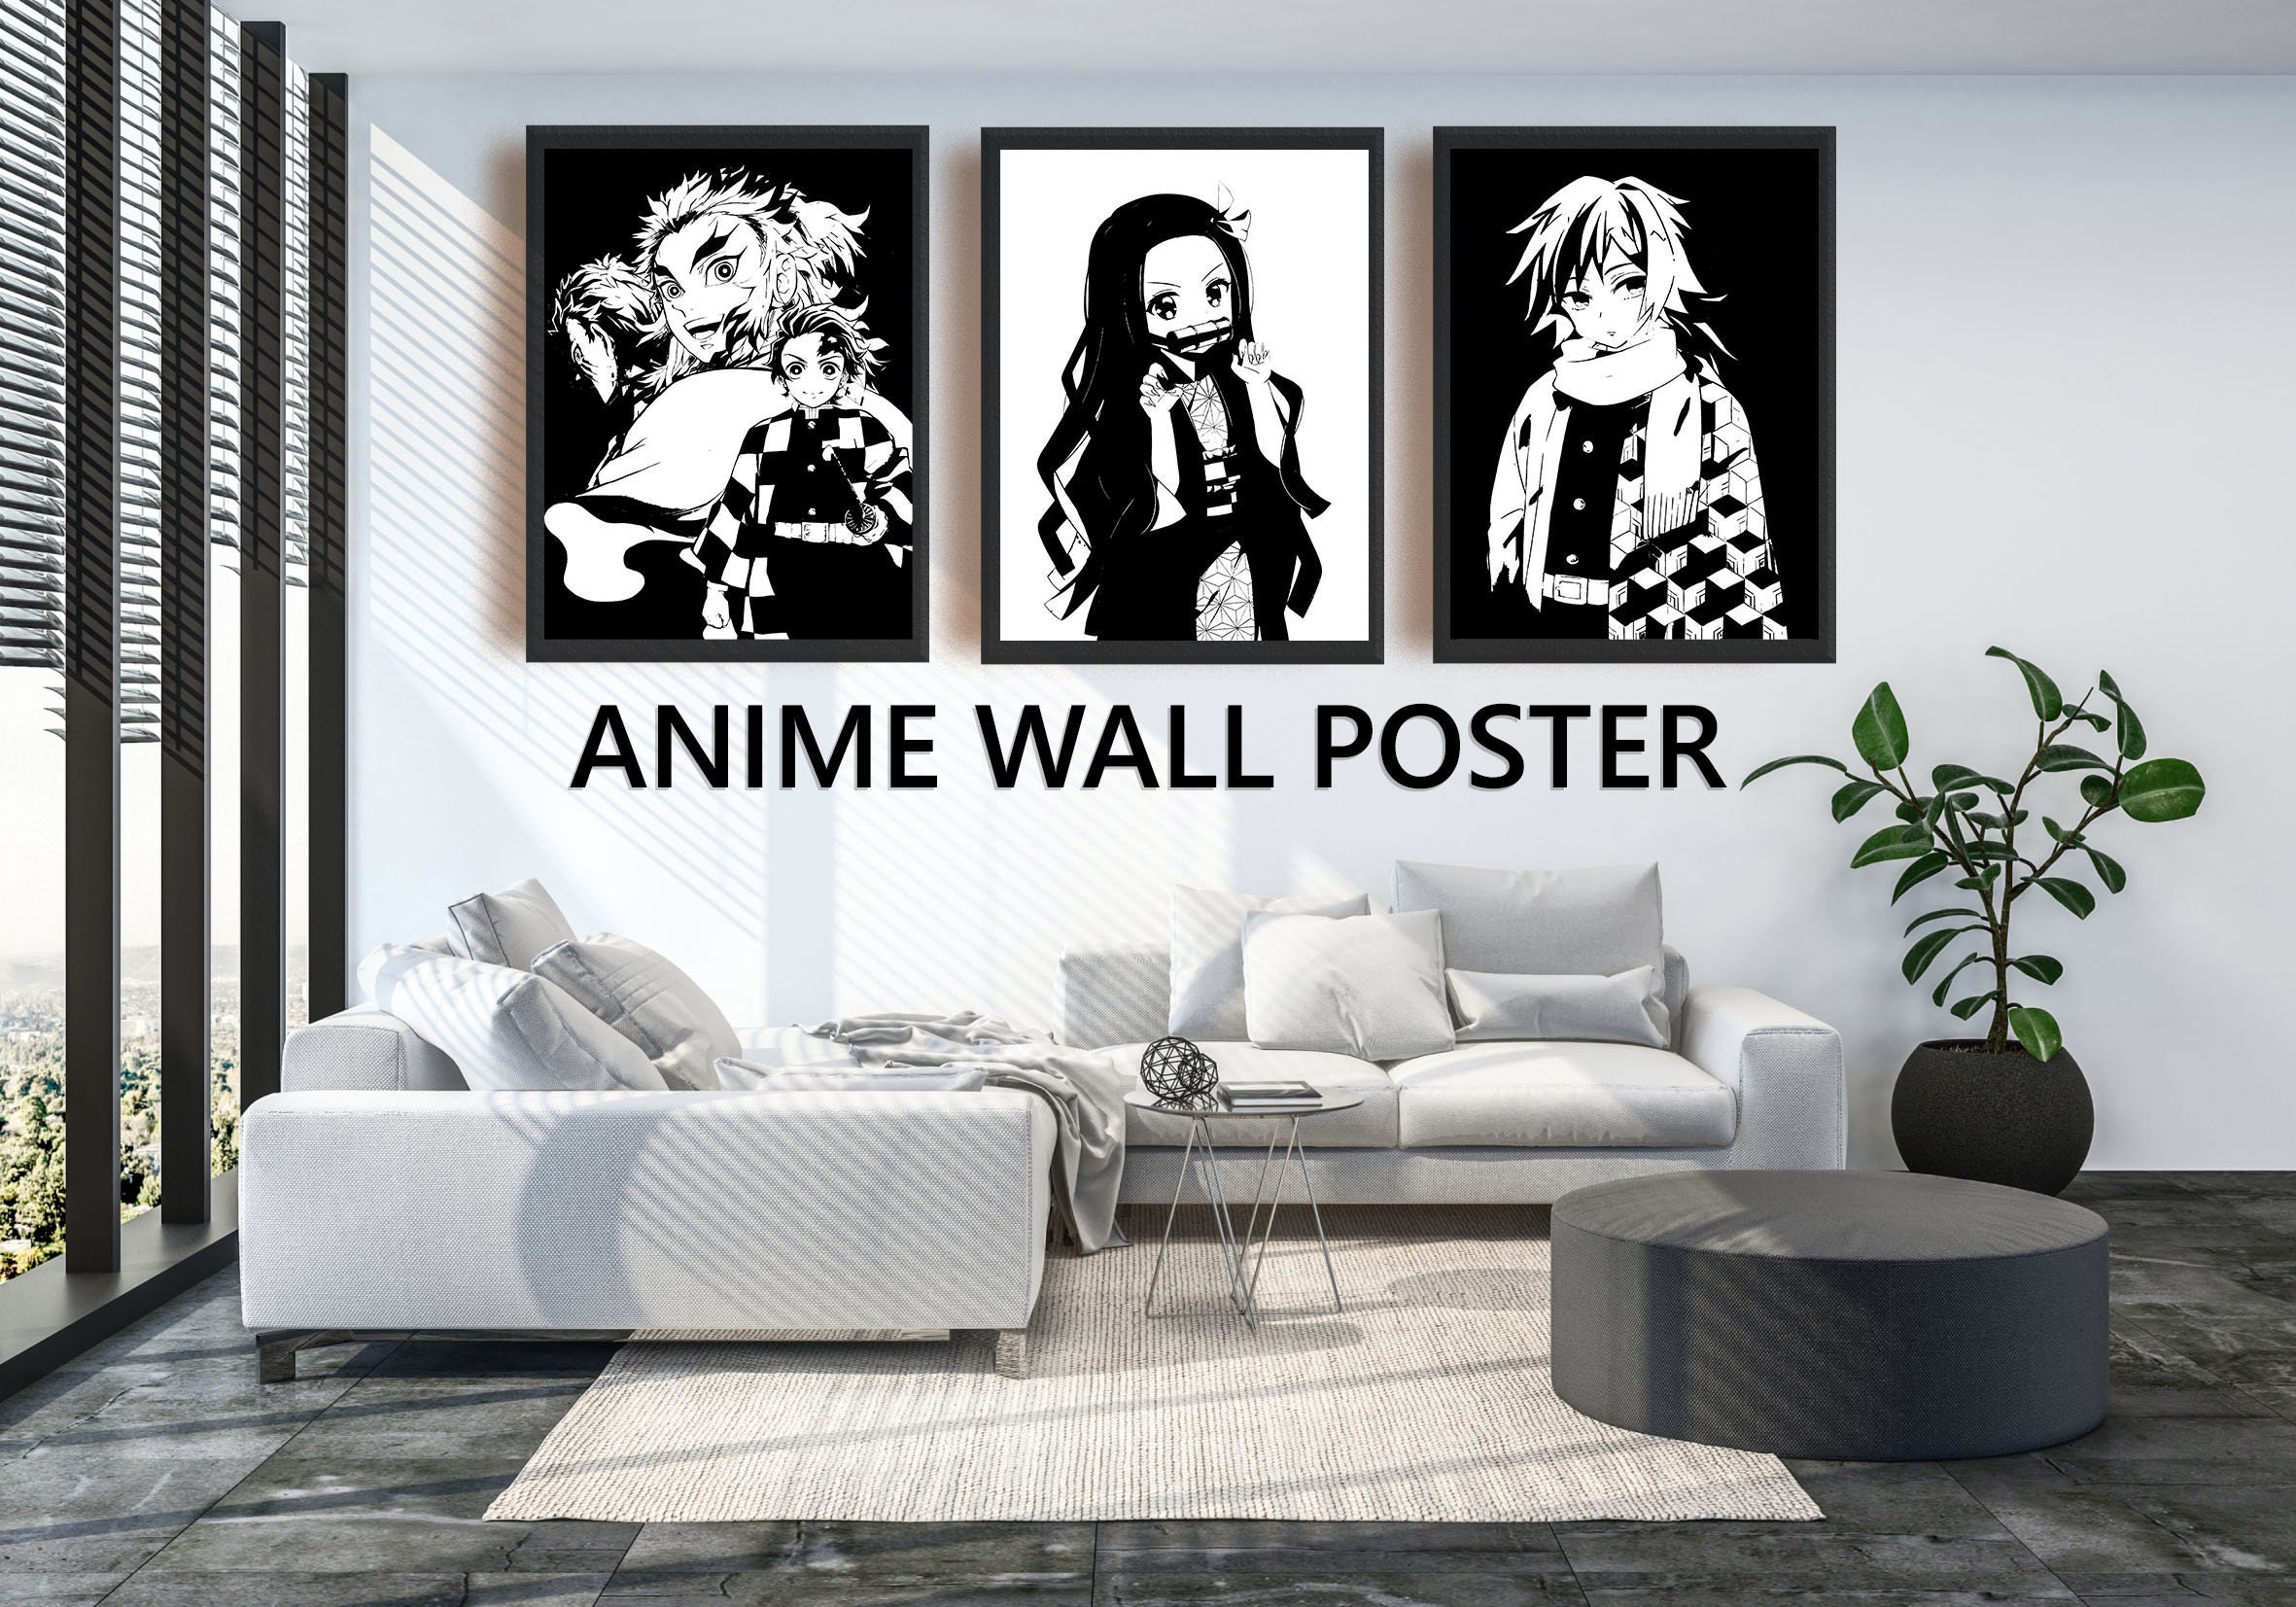 Anime Angels of Death Tapestry Home Decor Wall Hanging Cloth Cos Gift  75*100CM#C